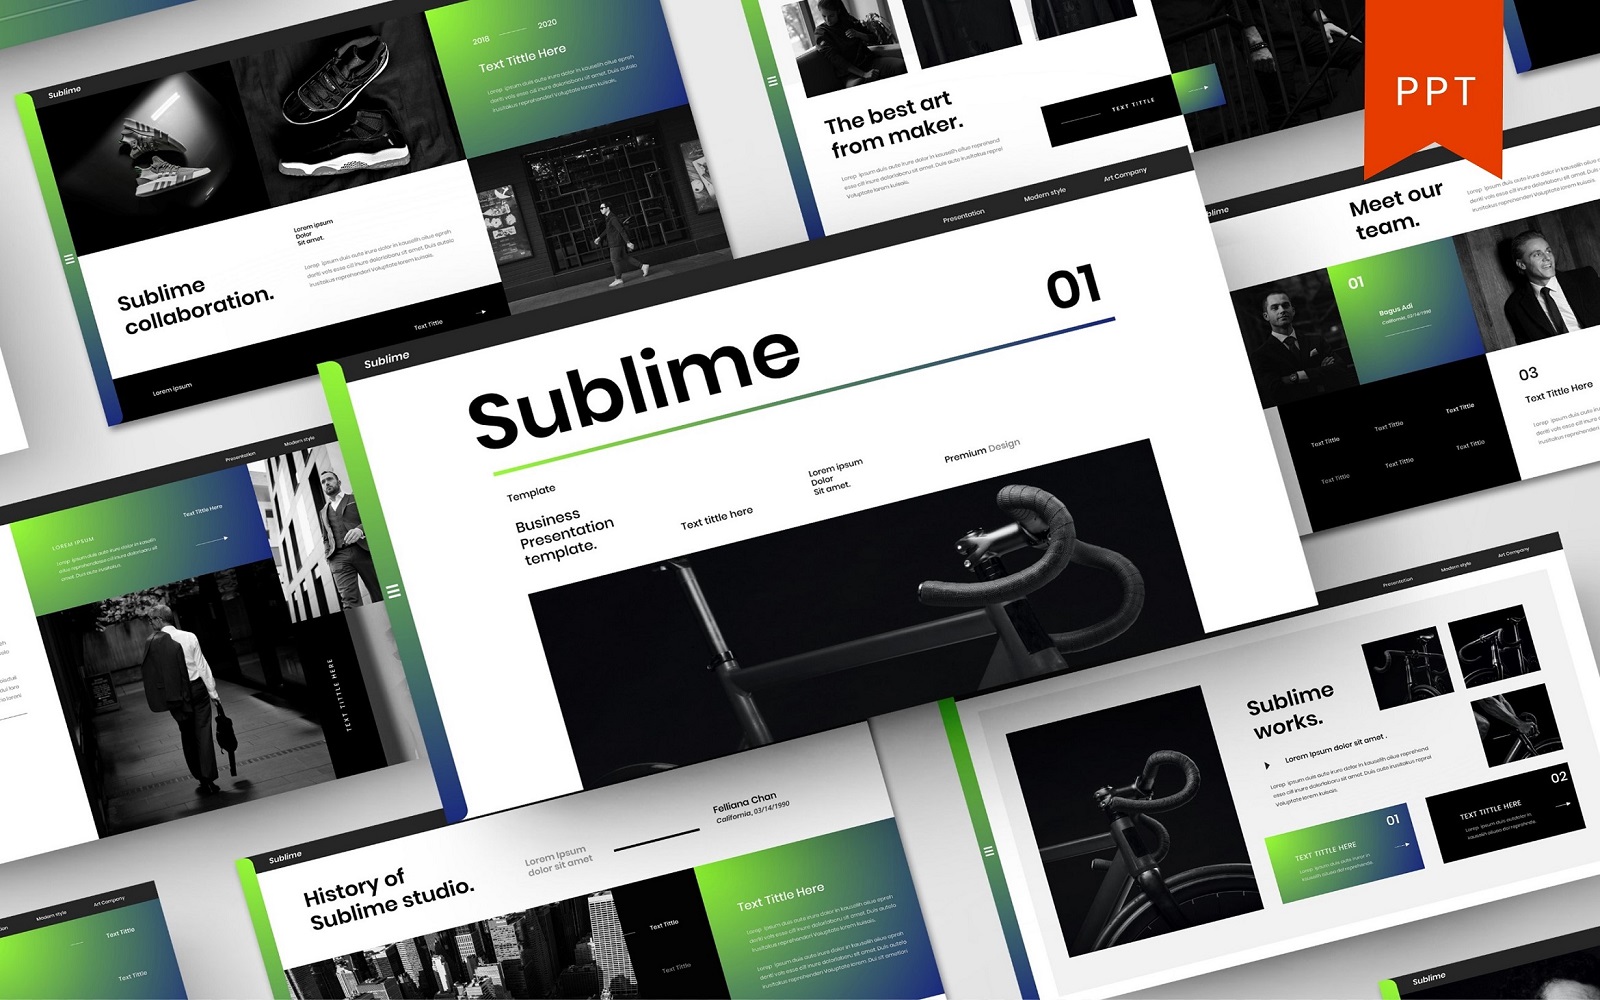 Sublime – Business PowerPoint Template